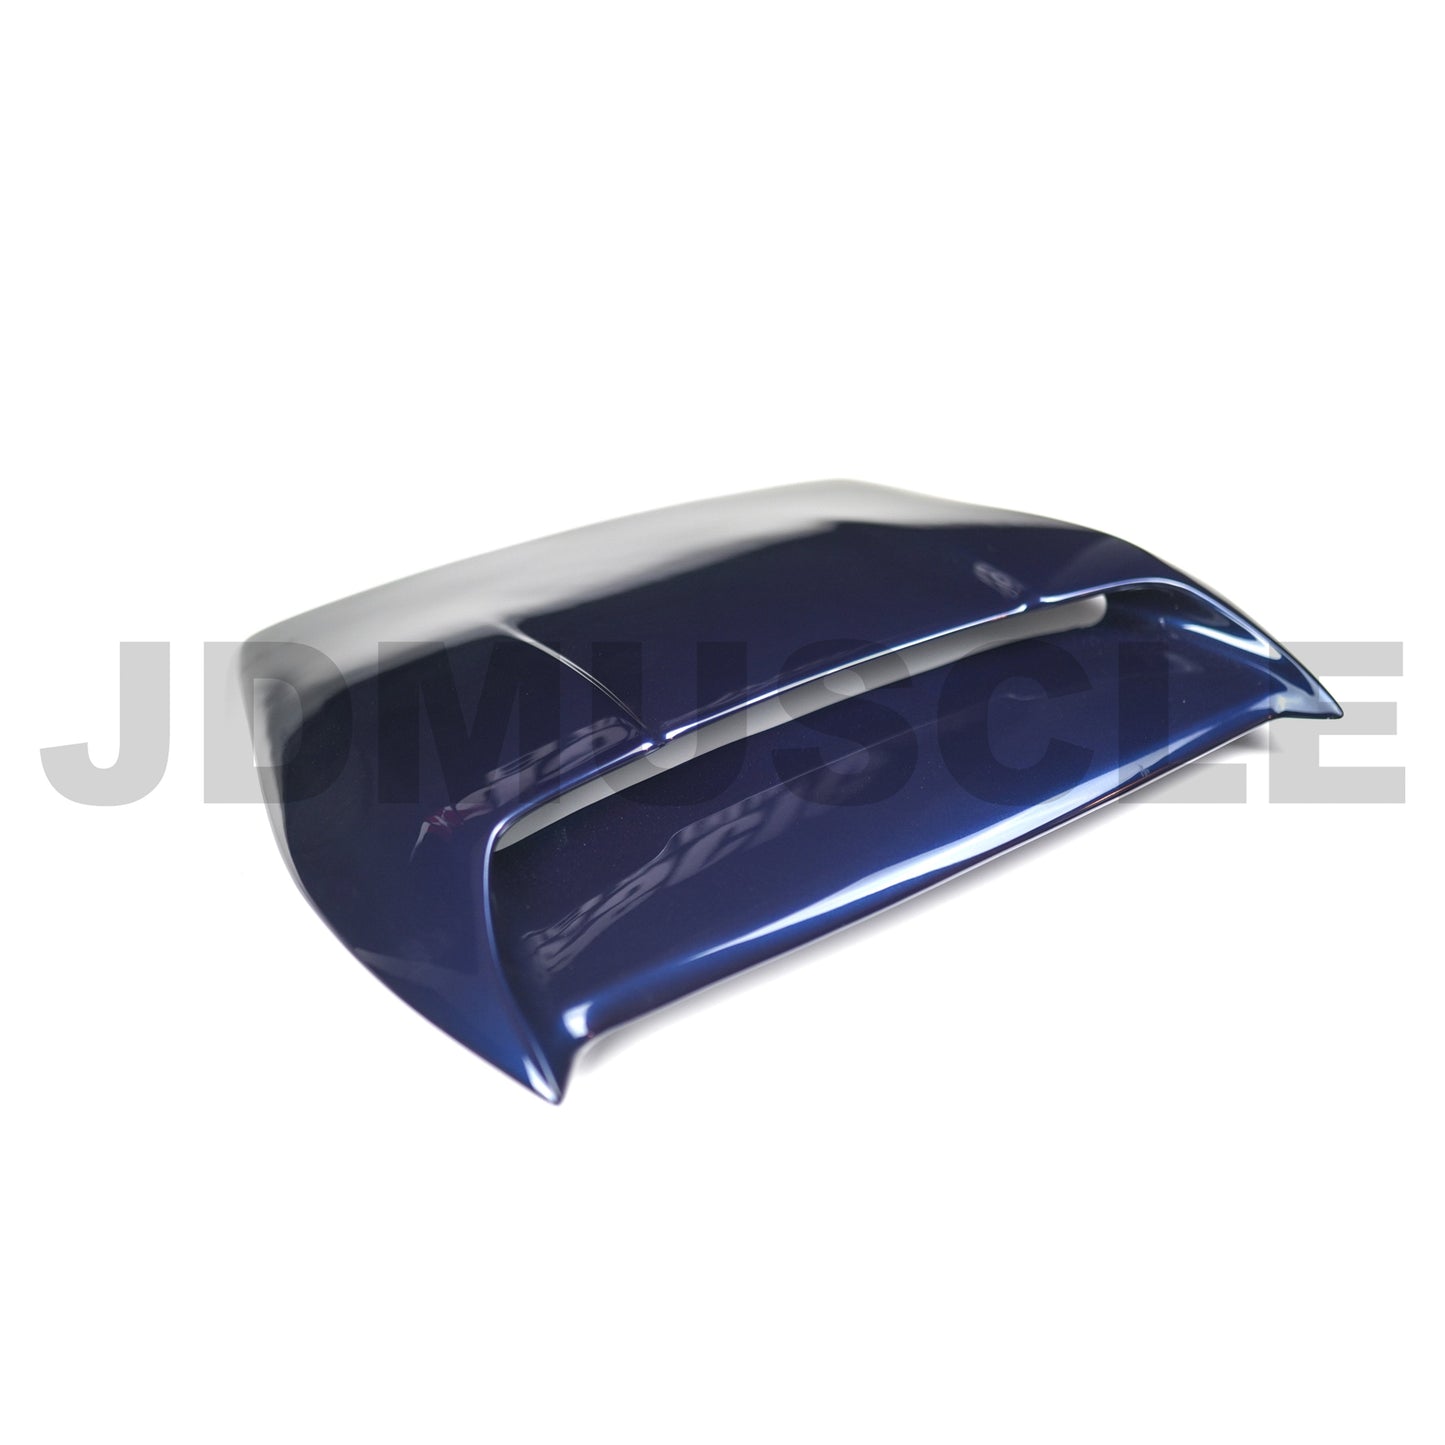 JDMuscle 15-21 WRX/STI Rally Style V2 Paint Matched Hood Scoop